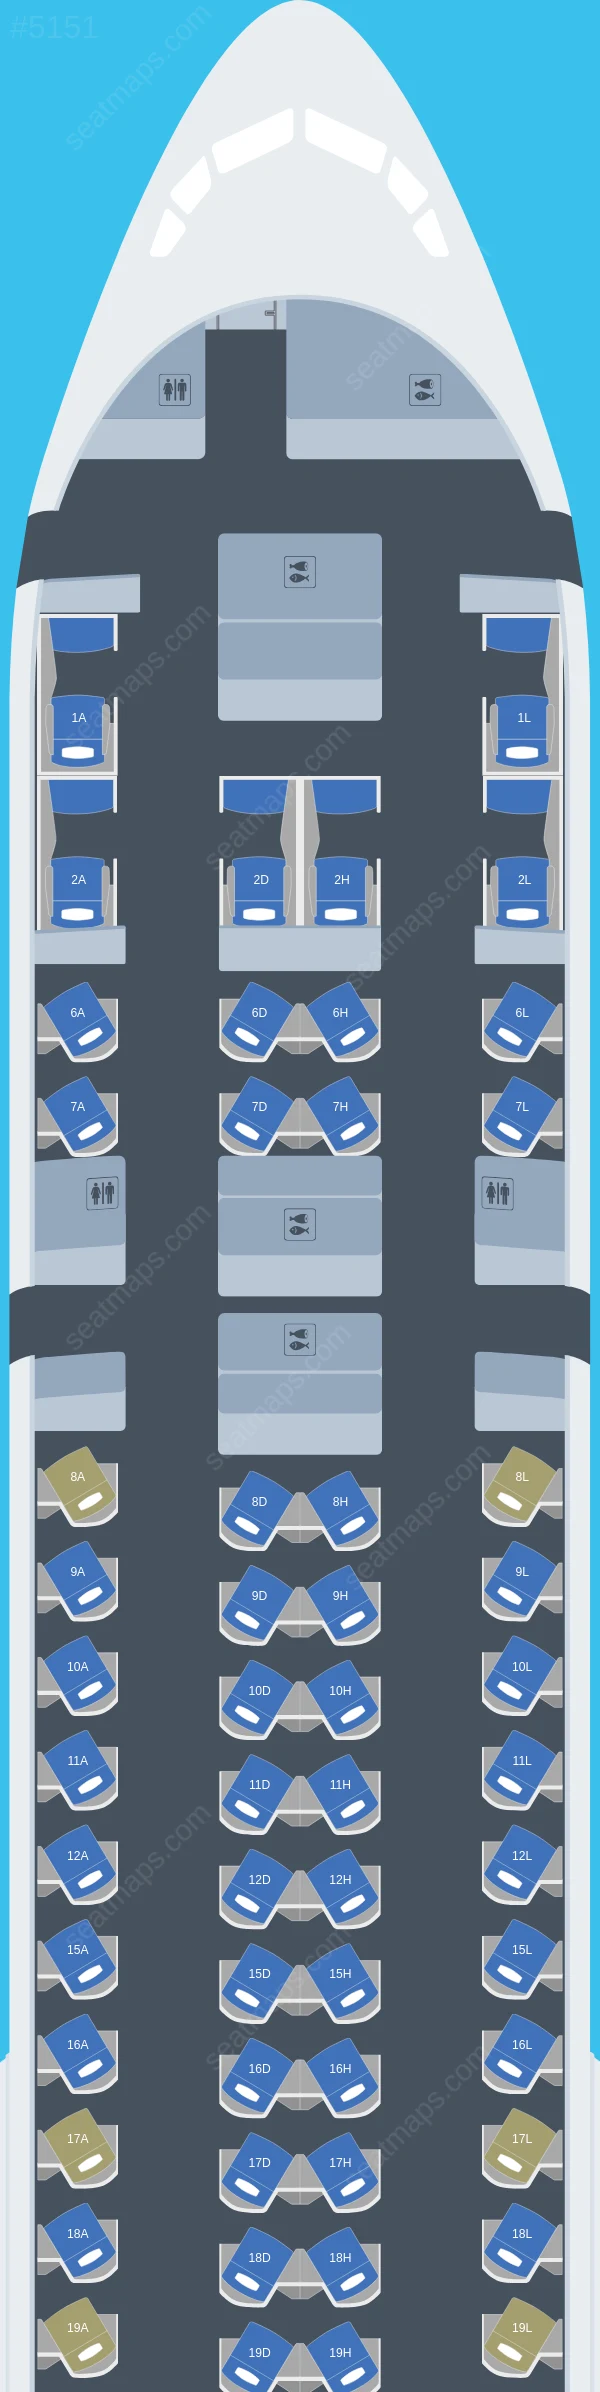 China Eastern Boeing 777-300ER seatmap preview